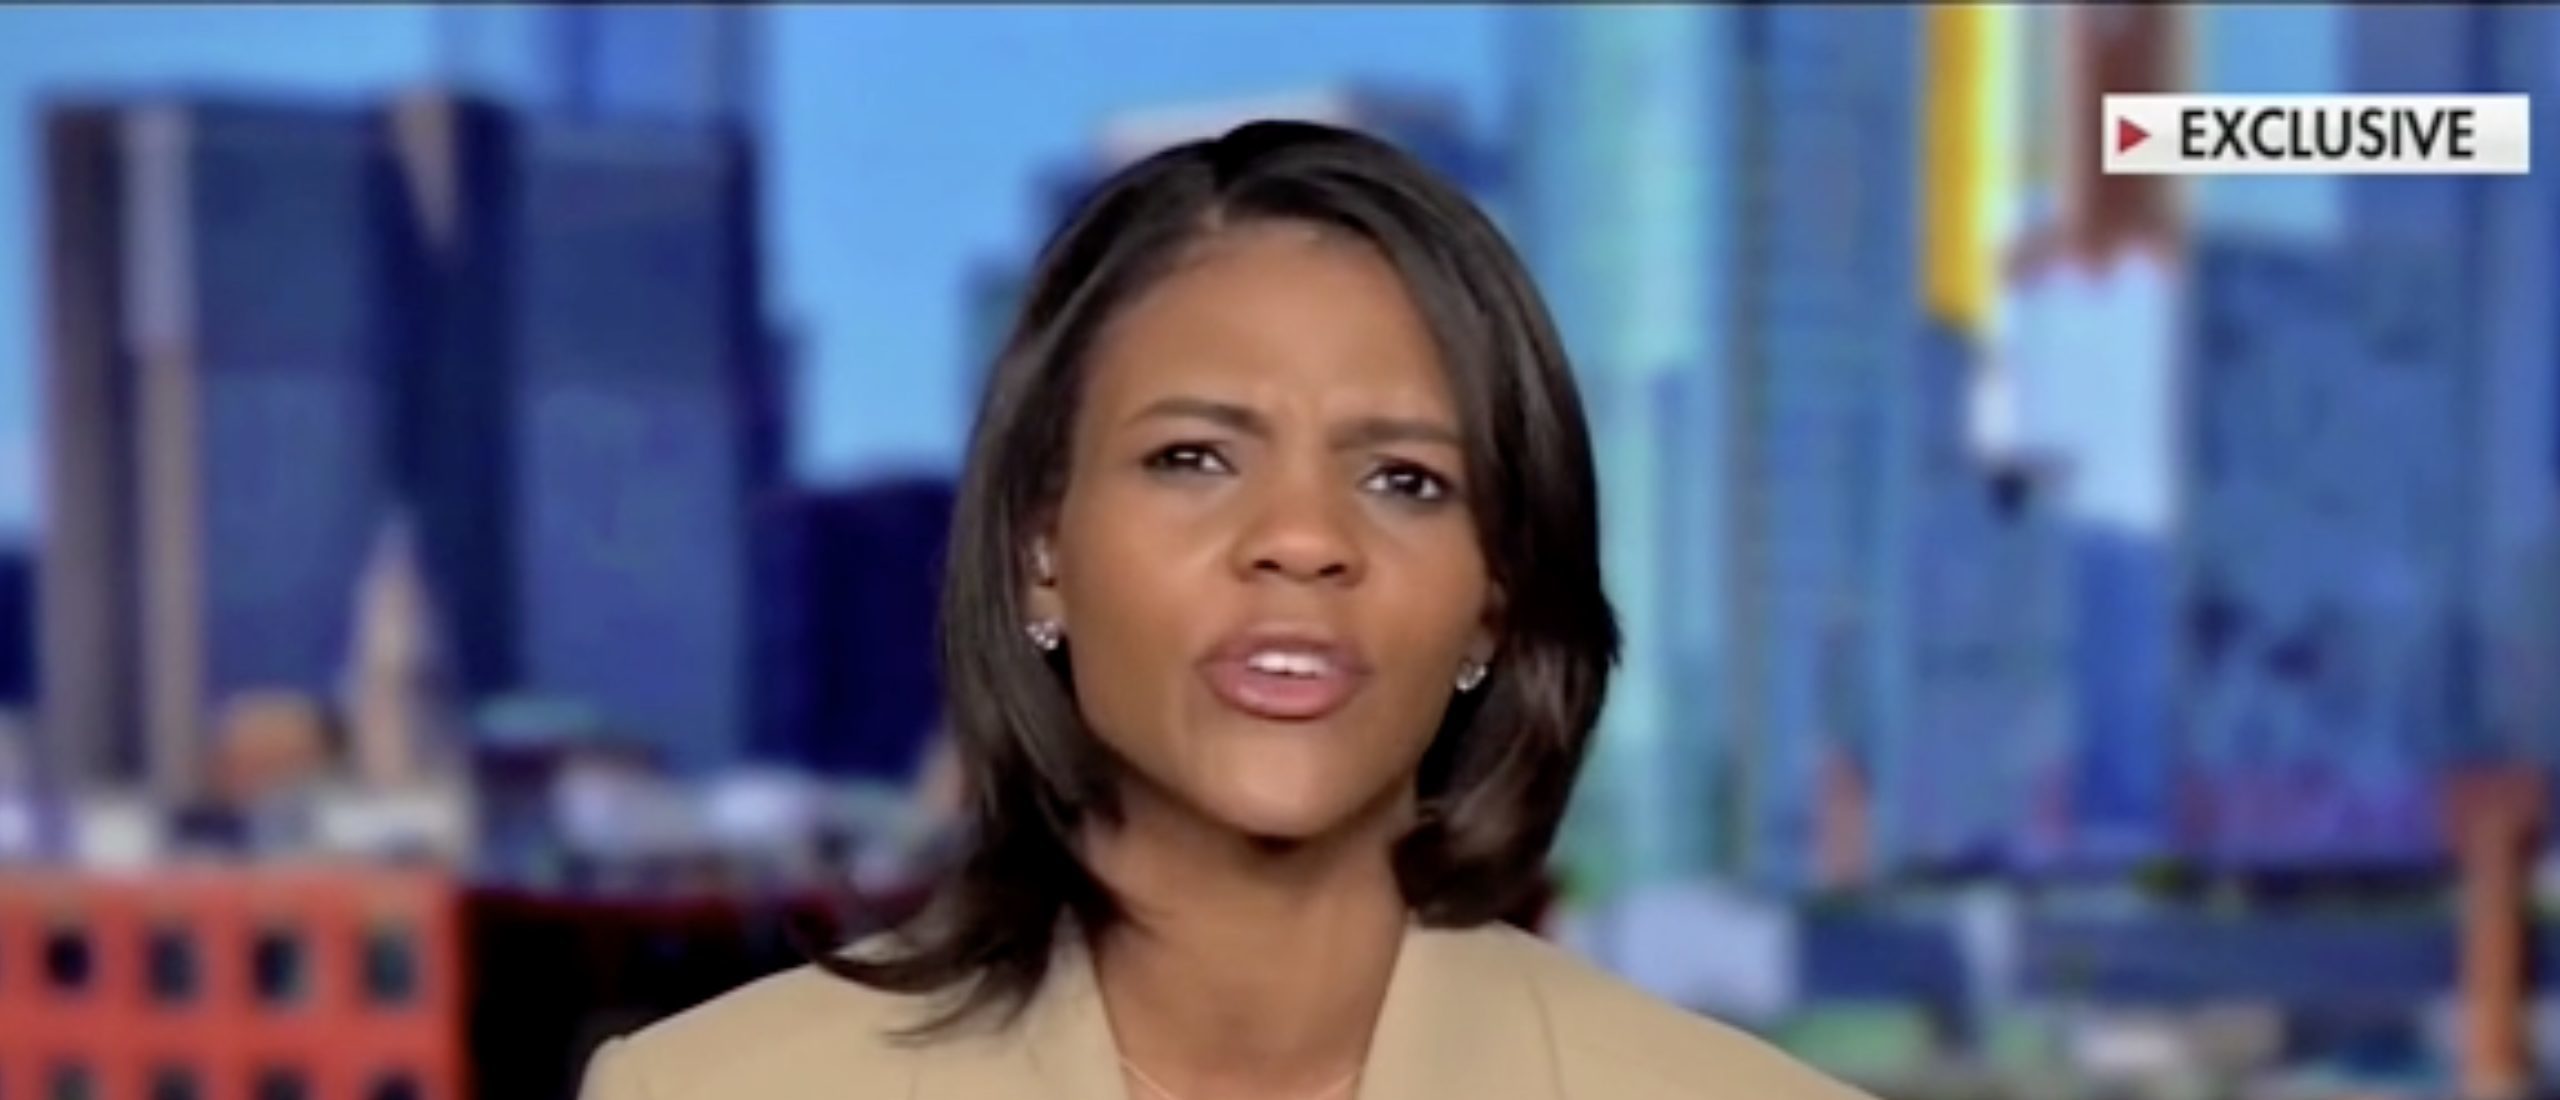 ‘Pull Your Children Out’: Candace Owens Says Public Schools Are Brainwashing Children To Embrace ‘Marxist Principles’